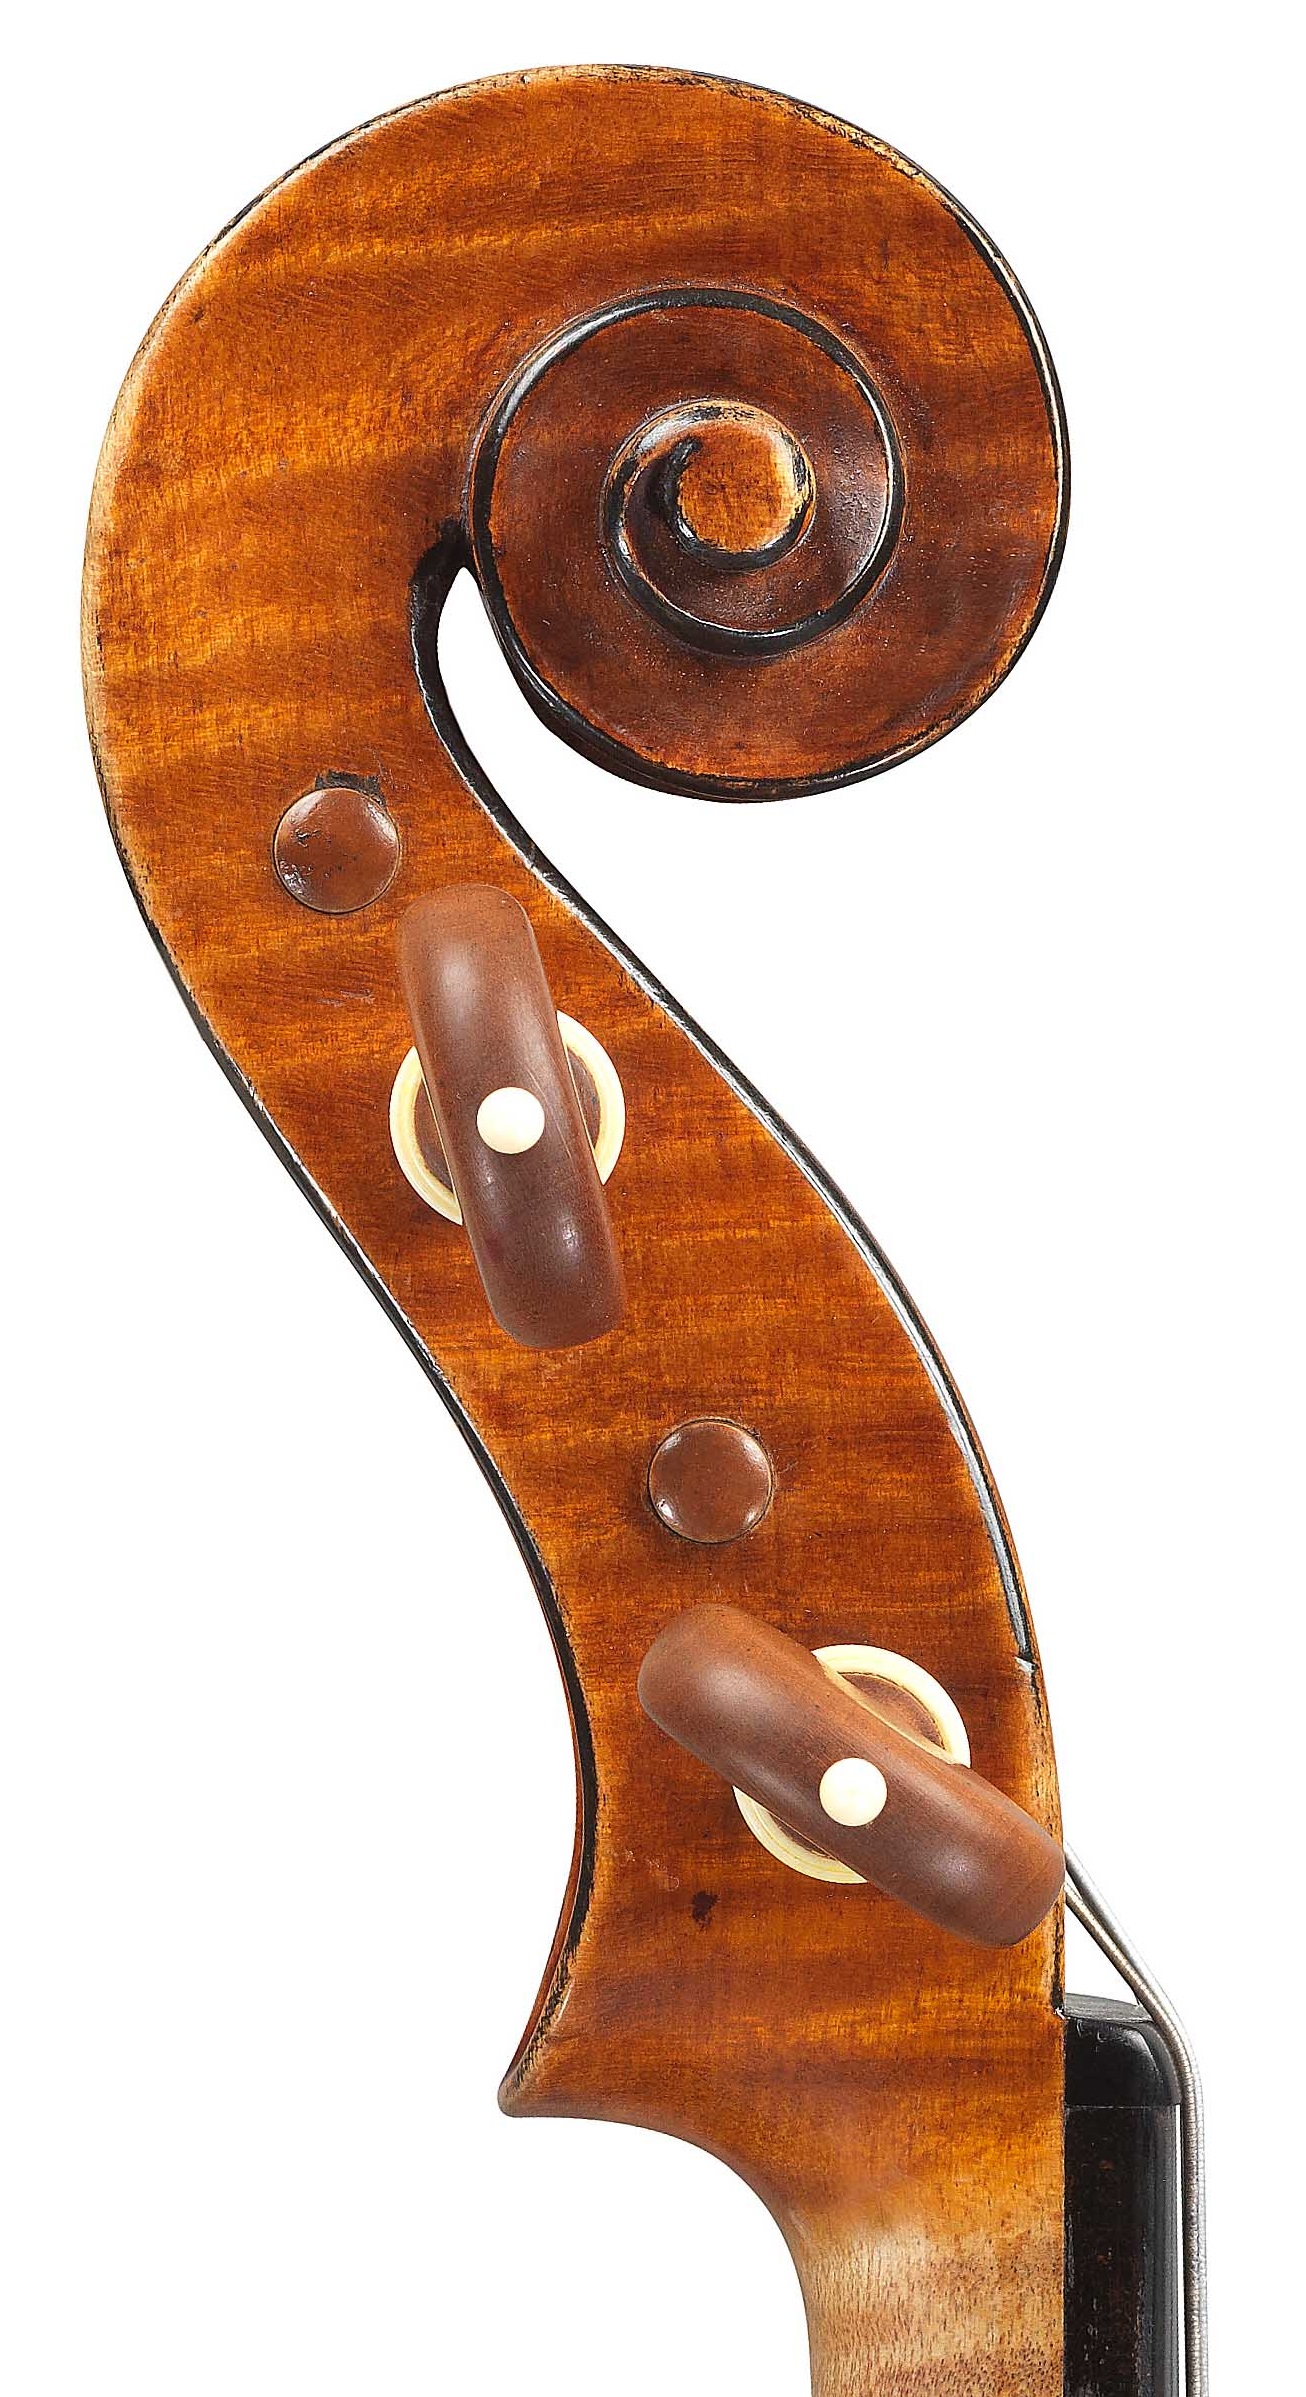 Scroll of violin by JB Vuillaume, ex-Sin, dated 1871, exhibited by Ingles & Hayday at Sotheby's in 2012